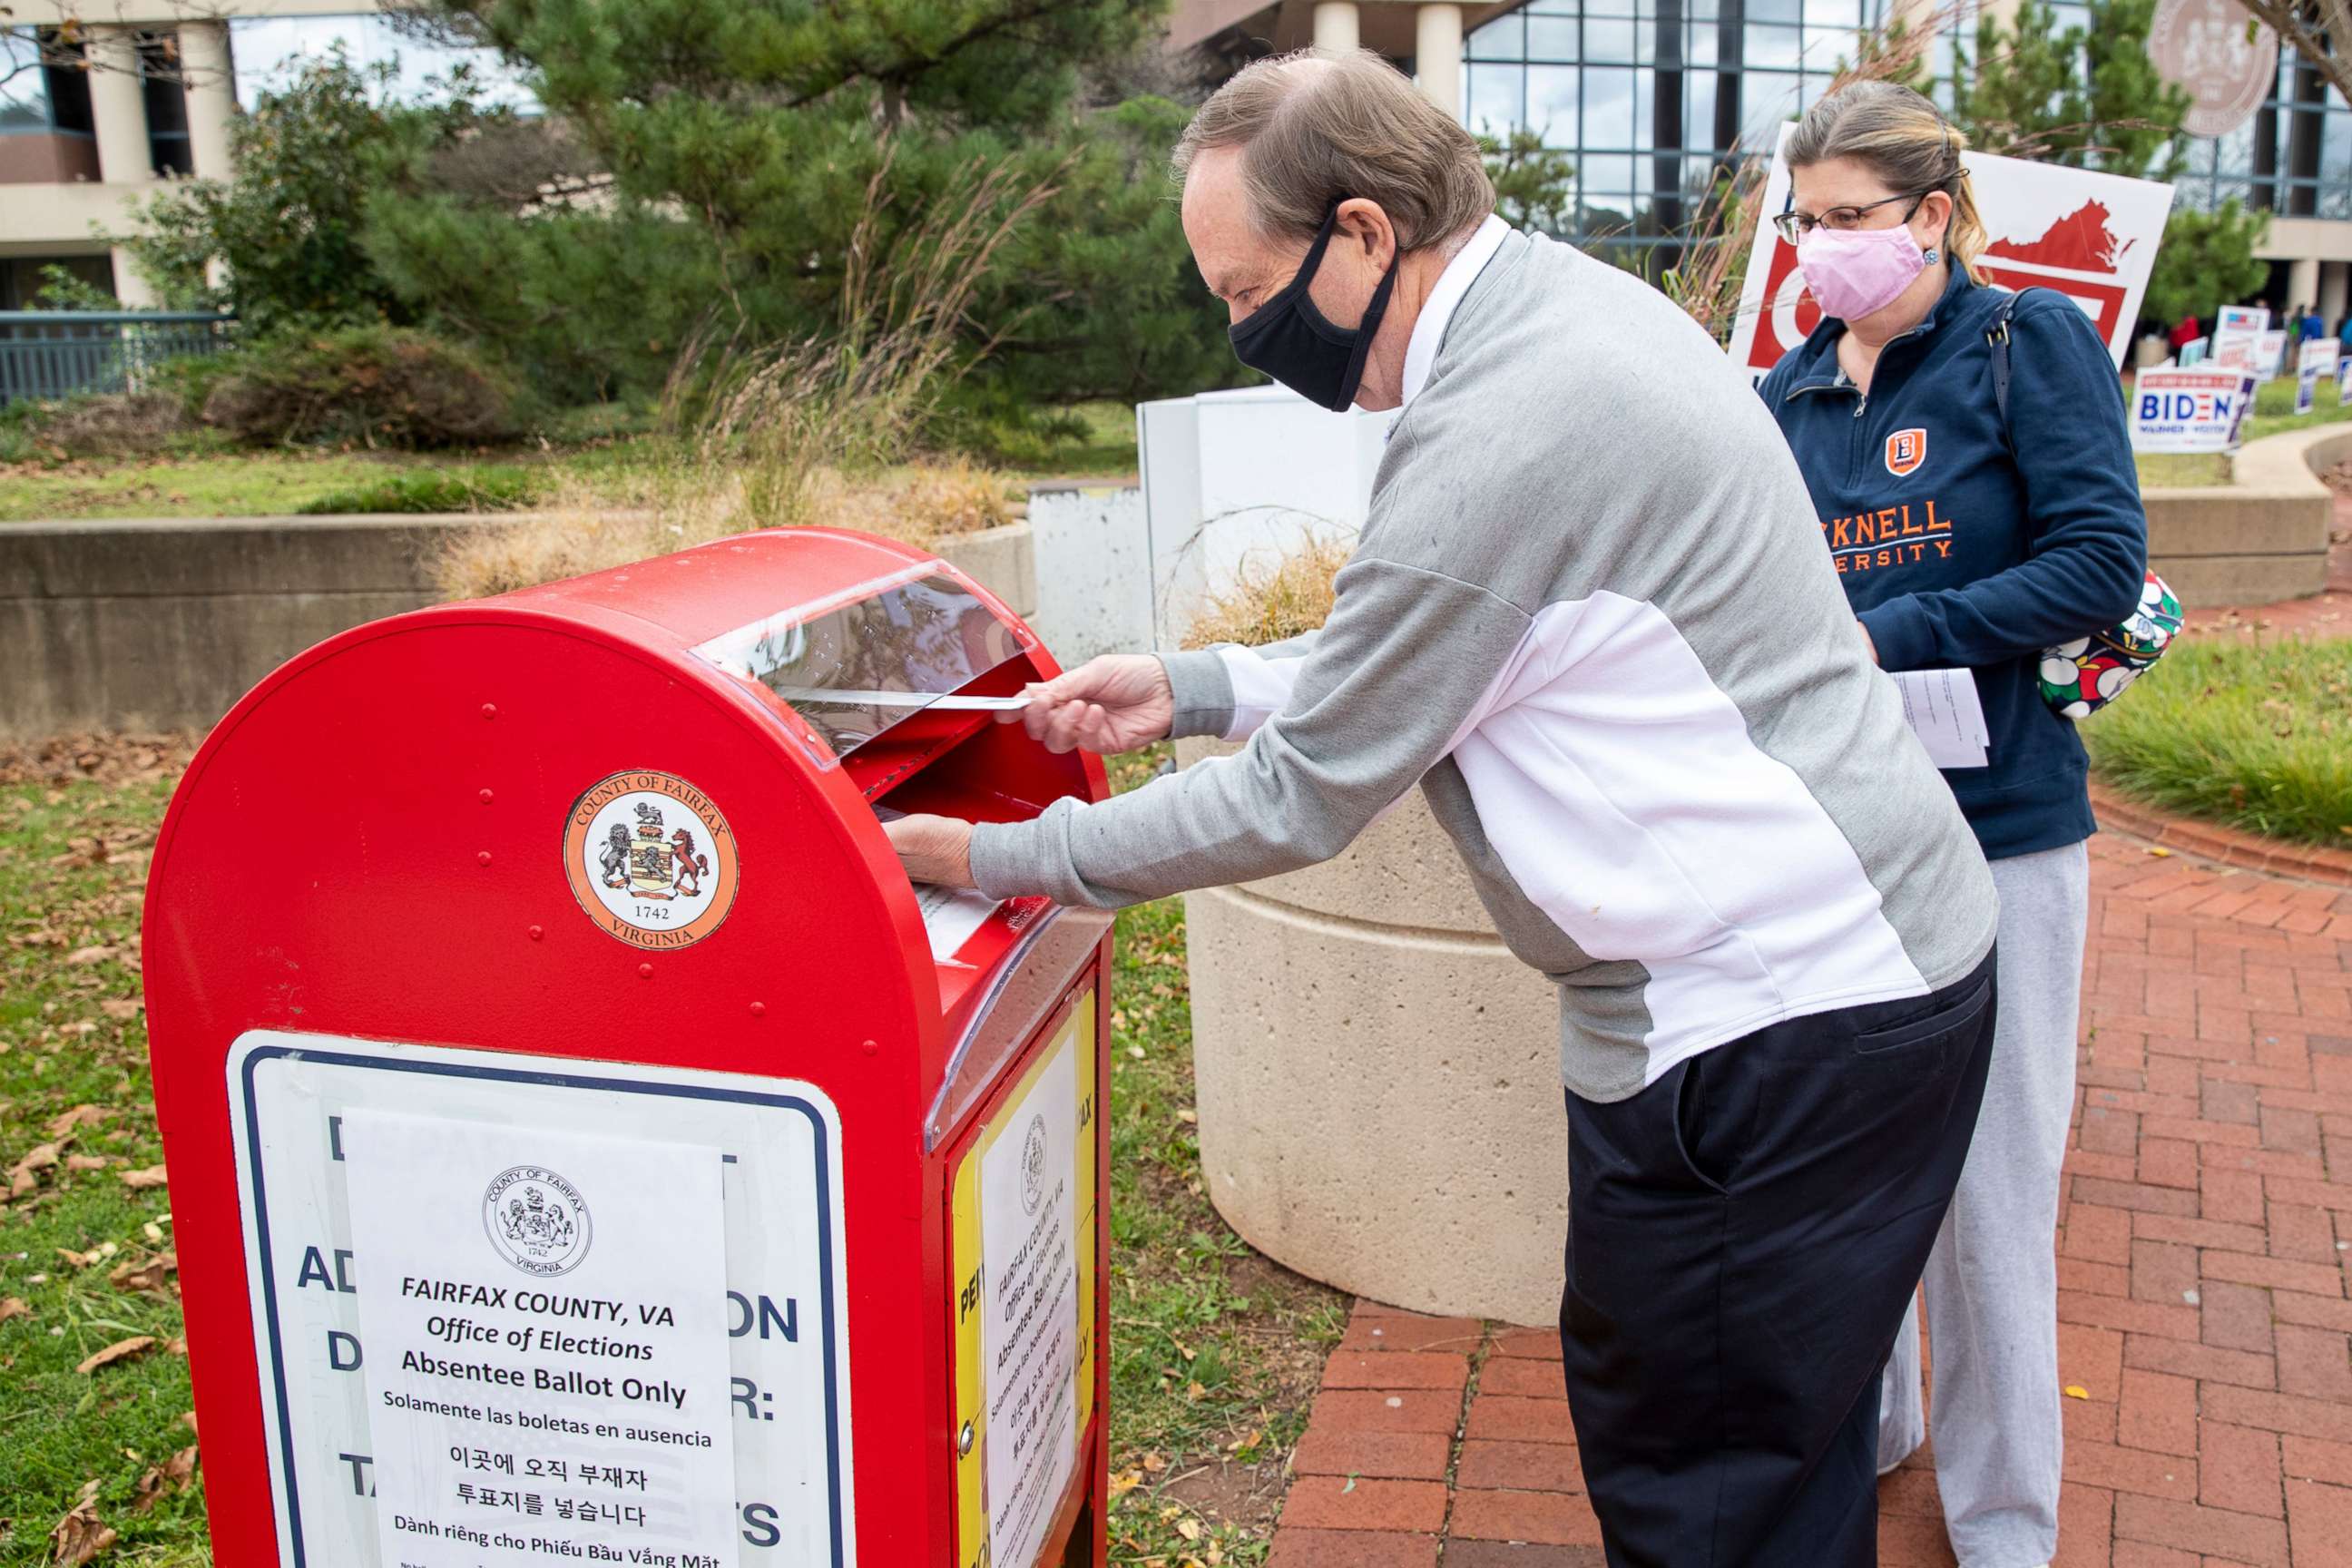 PHOTO: Voters deposit their ballots for the 2020 presidential election in a drop box at the Fairfax County Government Center in Fairfax, Va., Oct. 16, 2020.